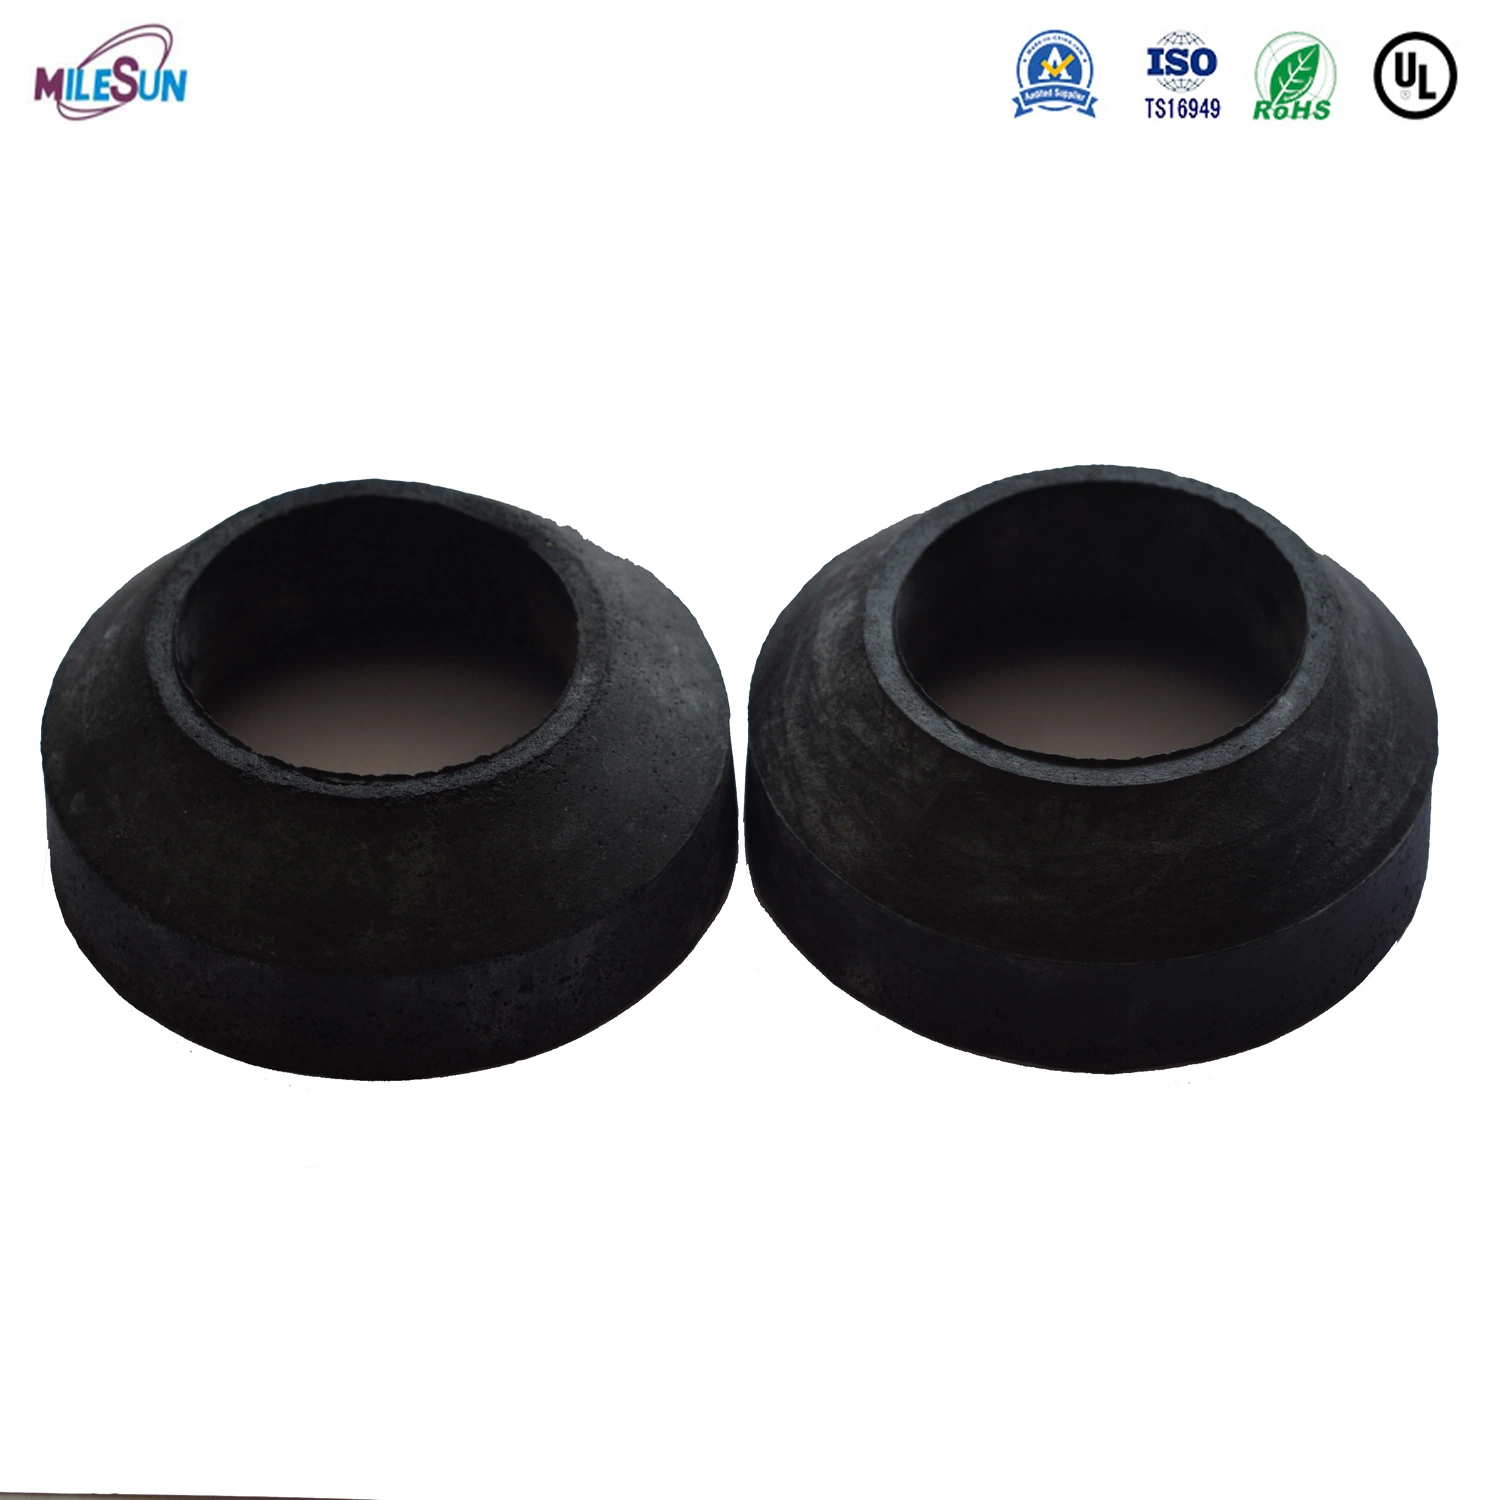 Customized Rubber Parts Rubber Sealing Spare Parts Damper for Home Appliances